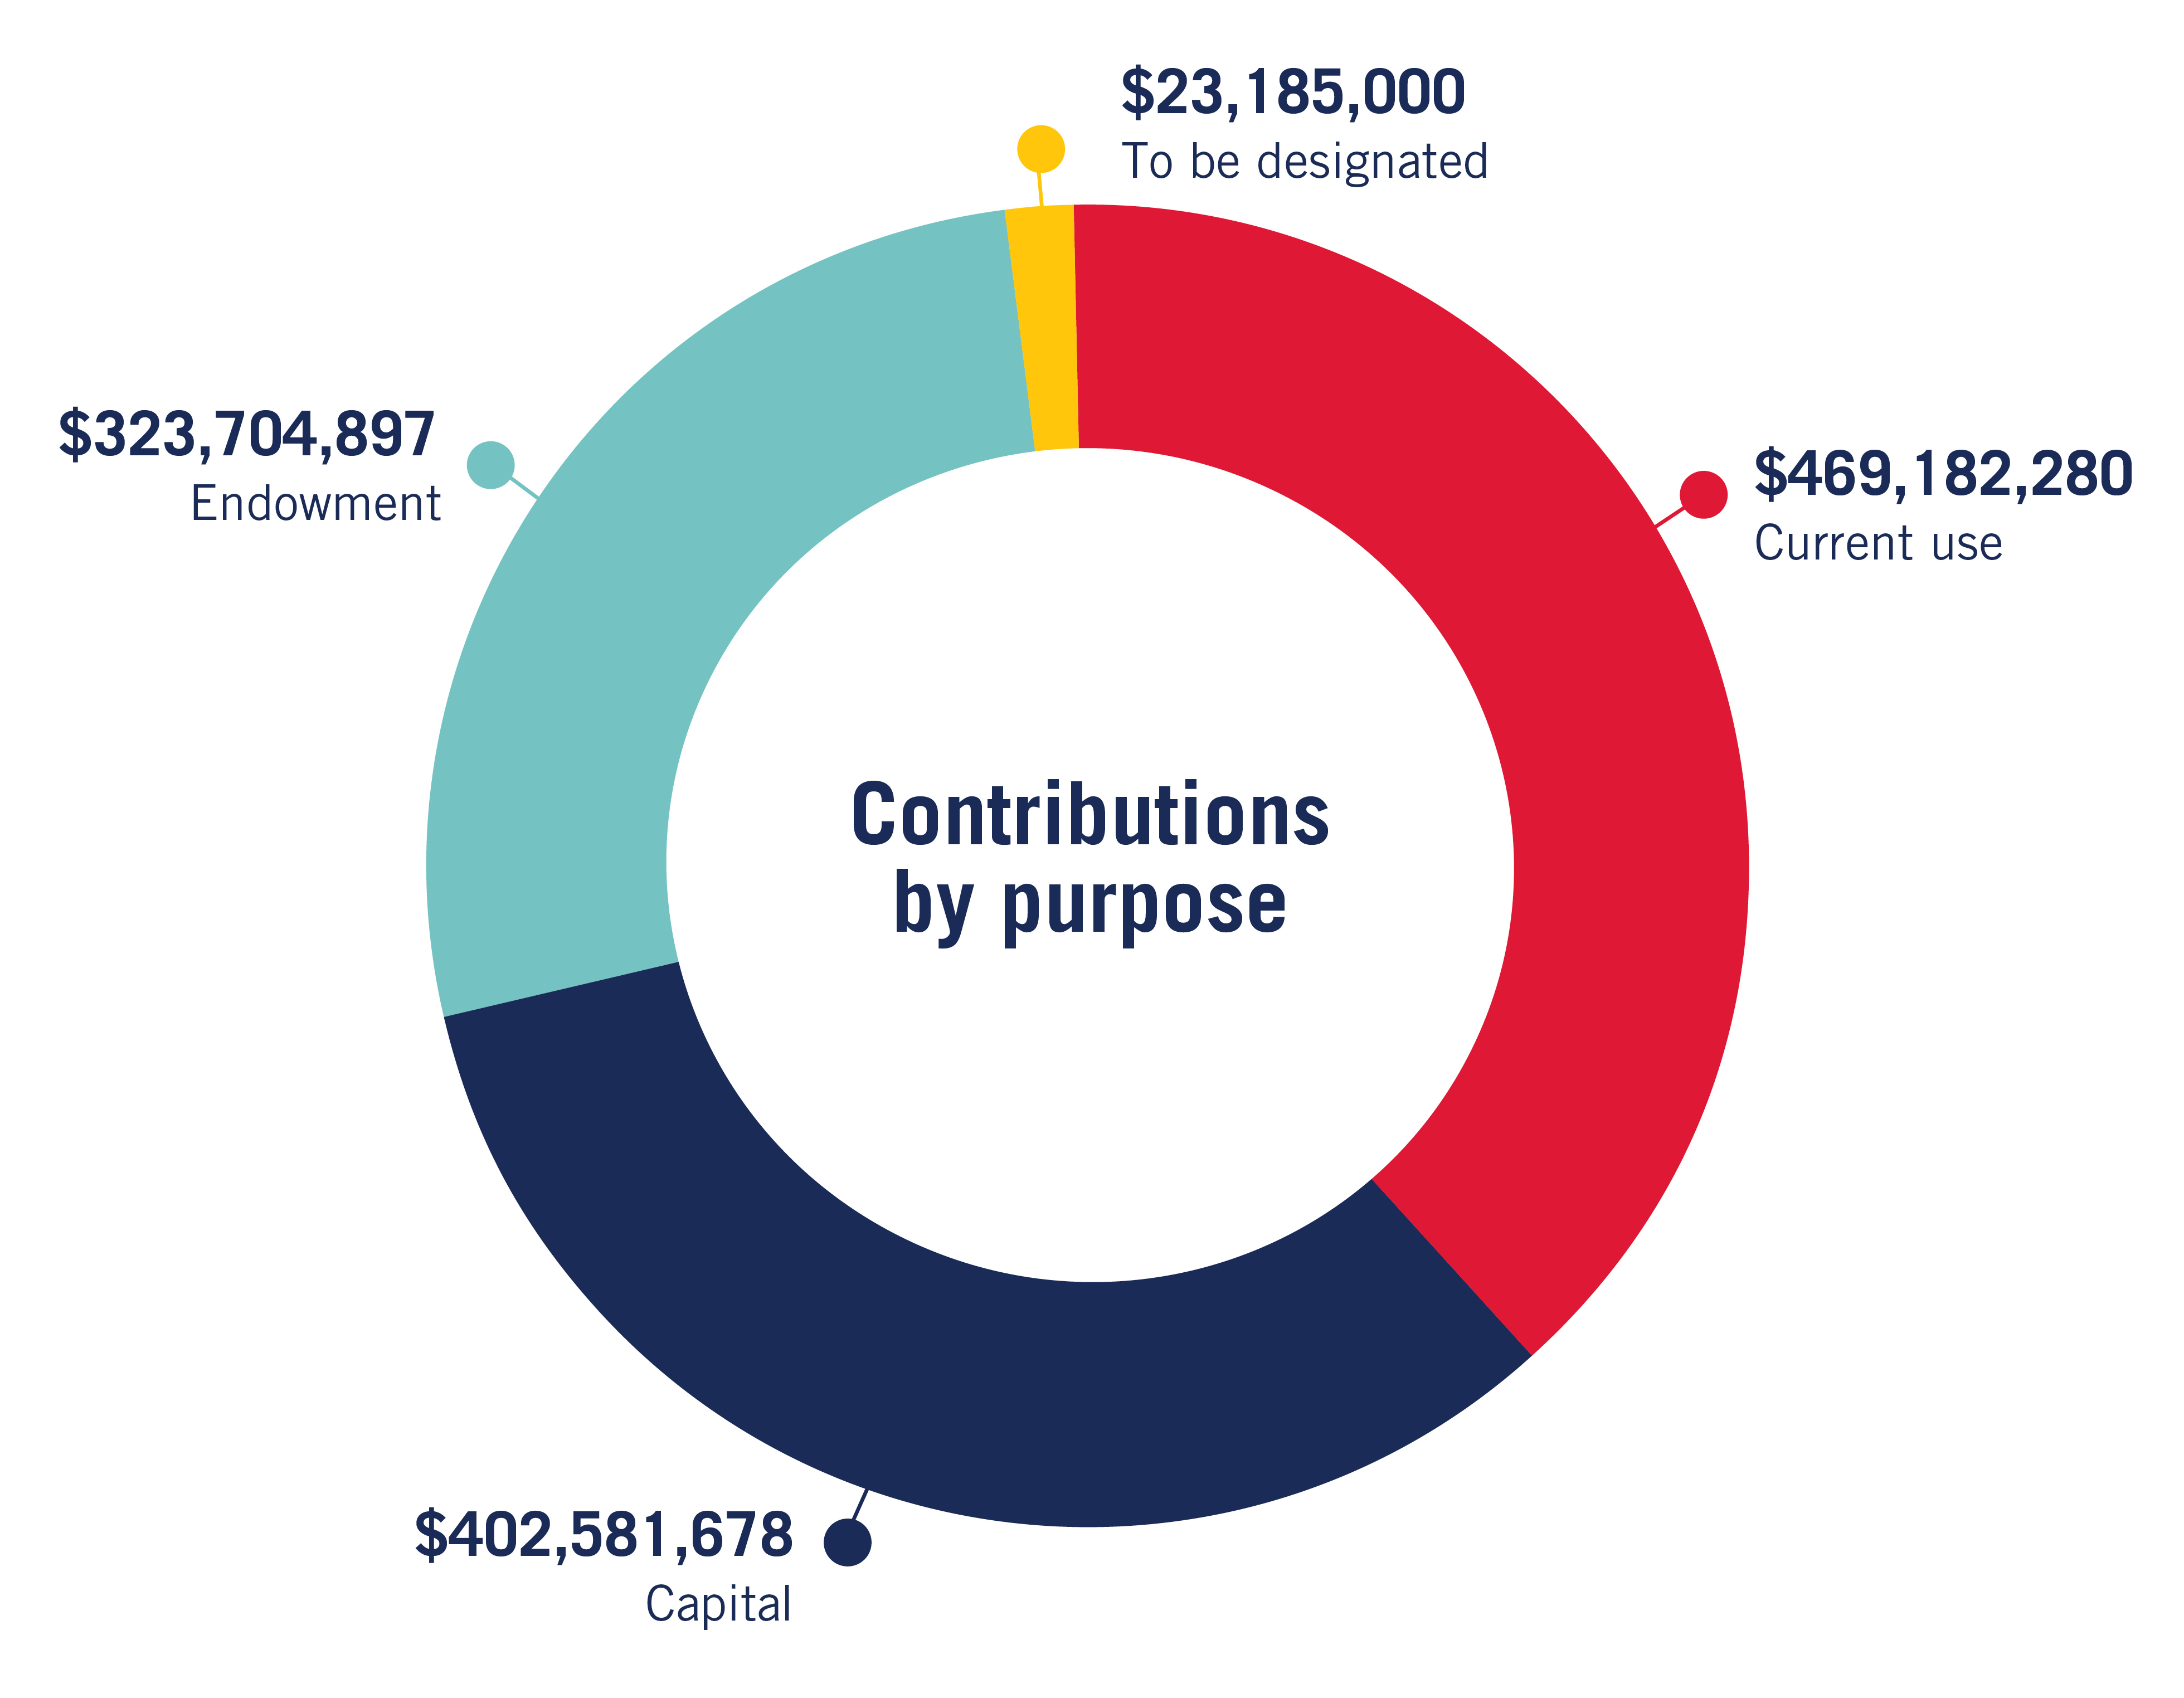 Graph showing that SMU has raised $469 million for current use, $402 million for capital projects, and $323 million for endowment